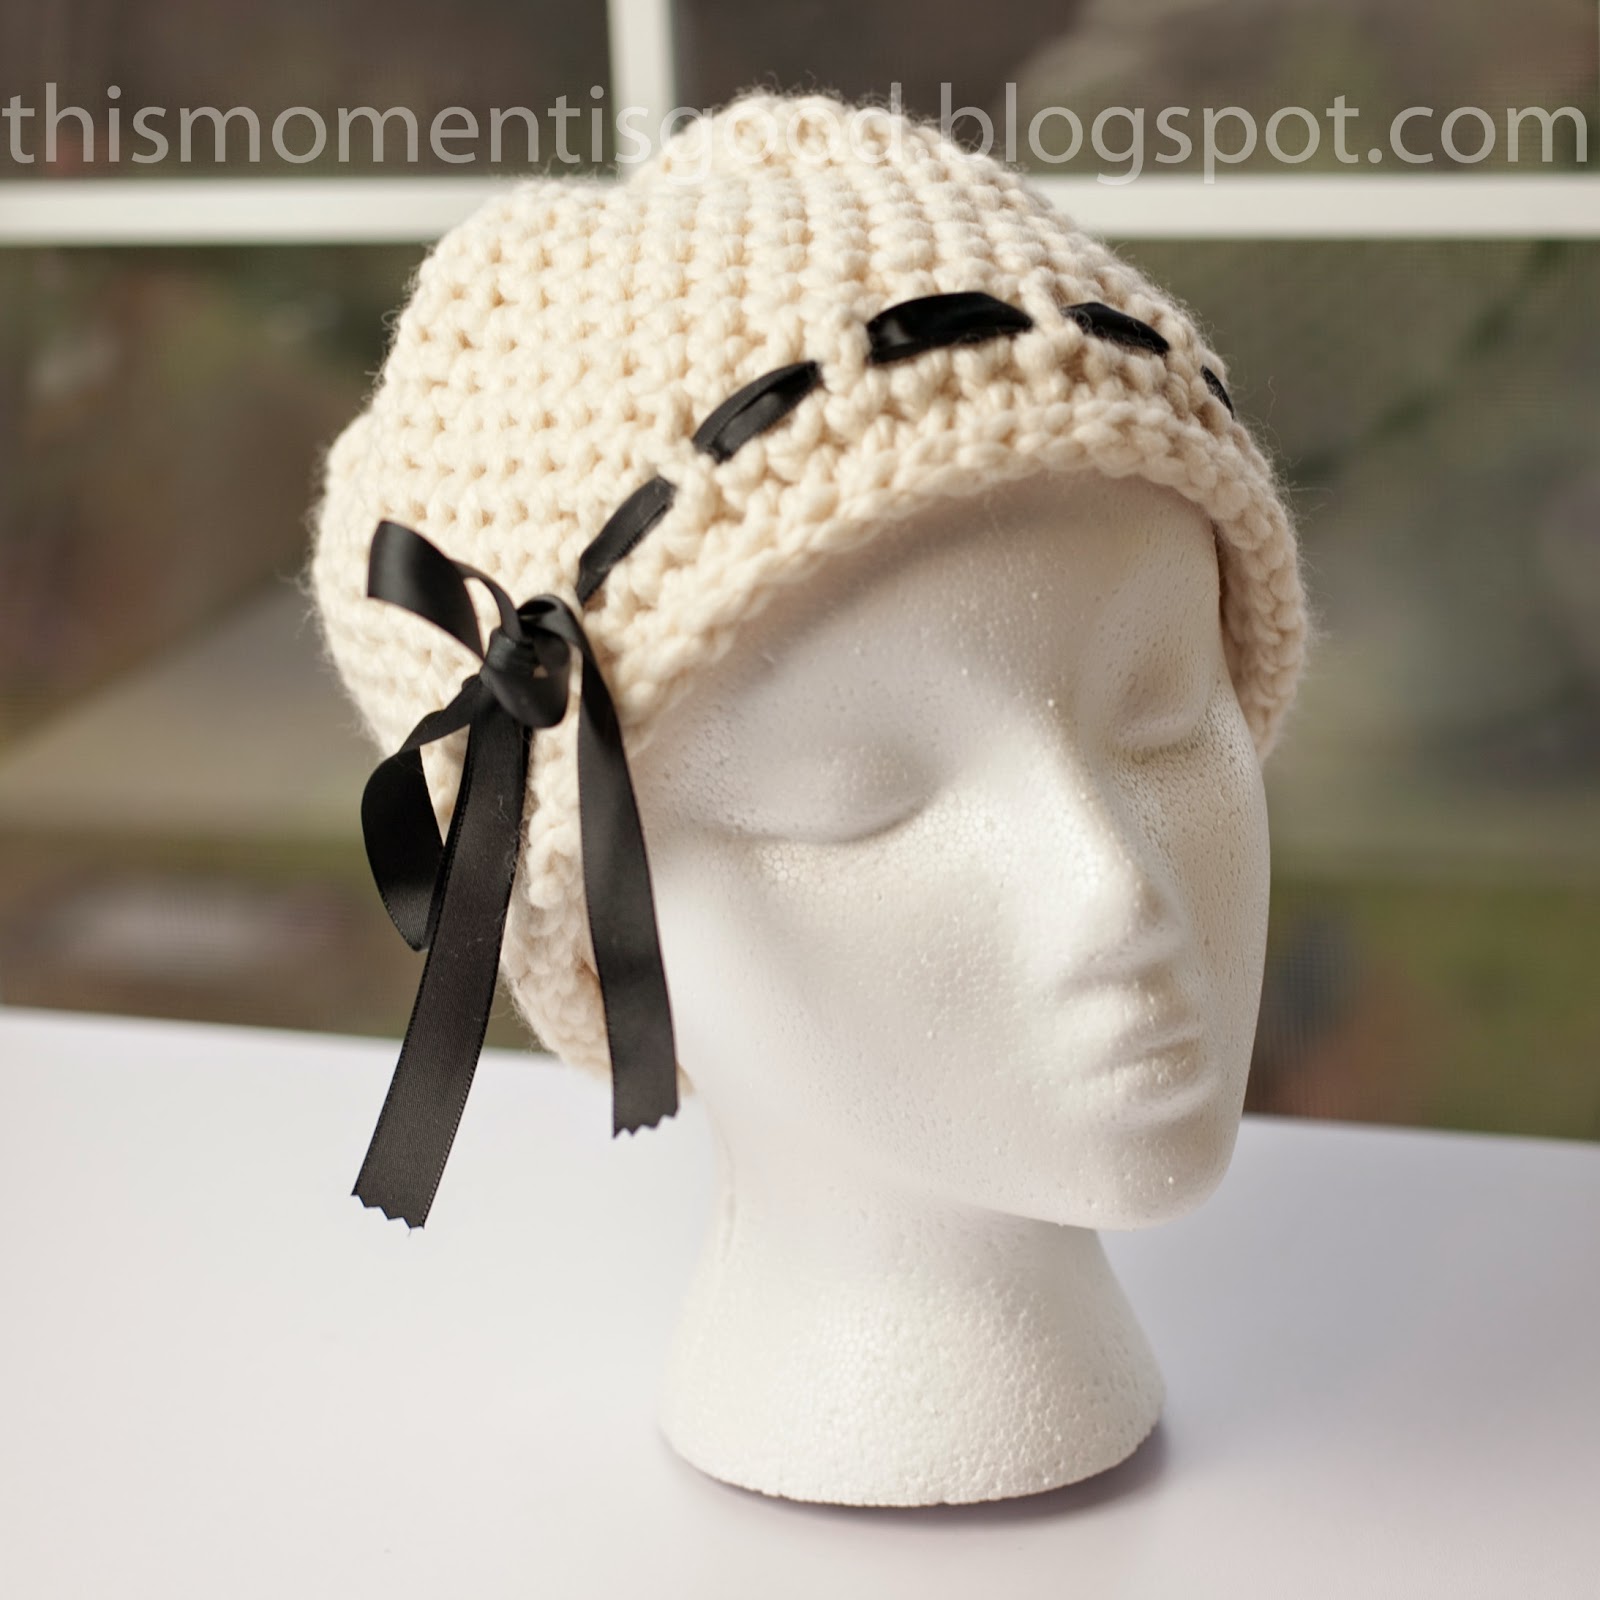 LOOM KNIT ELEGANT LADIES HAT PATTERN! | Loom Knitting by This Moment is ...